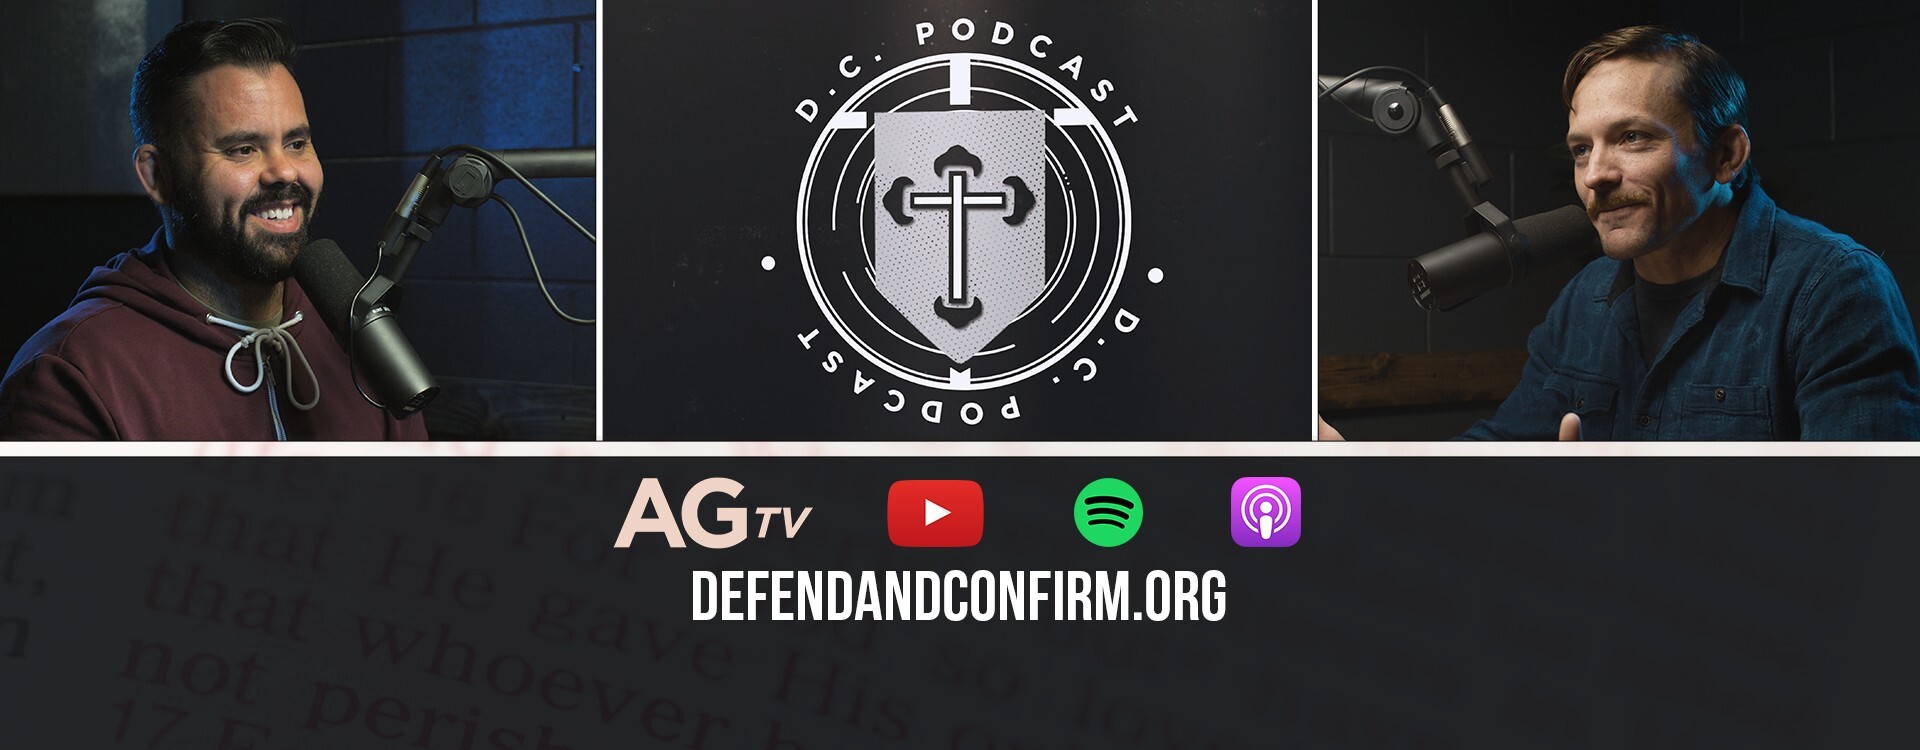 Defend and Confirm Podcast